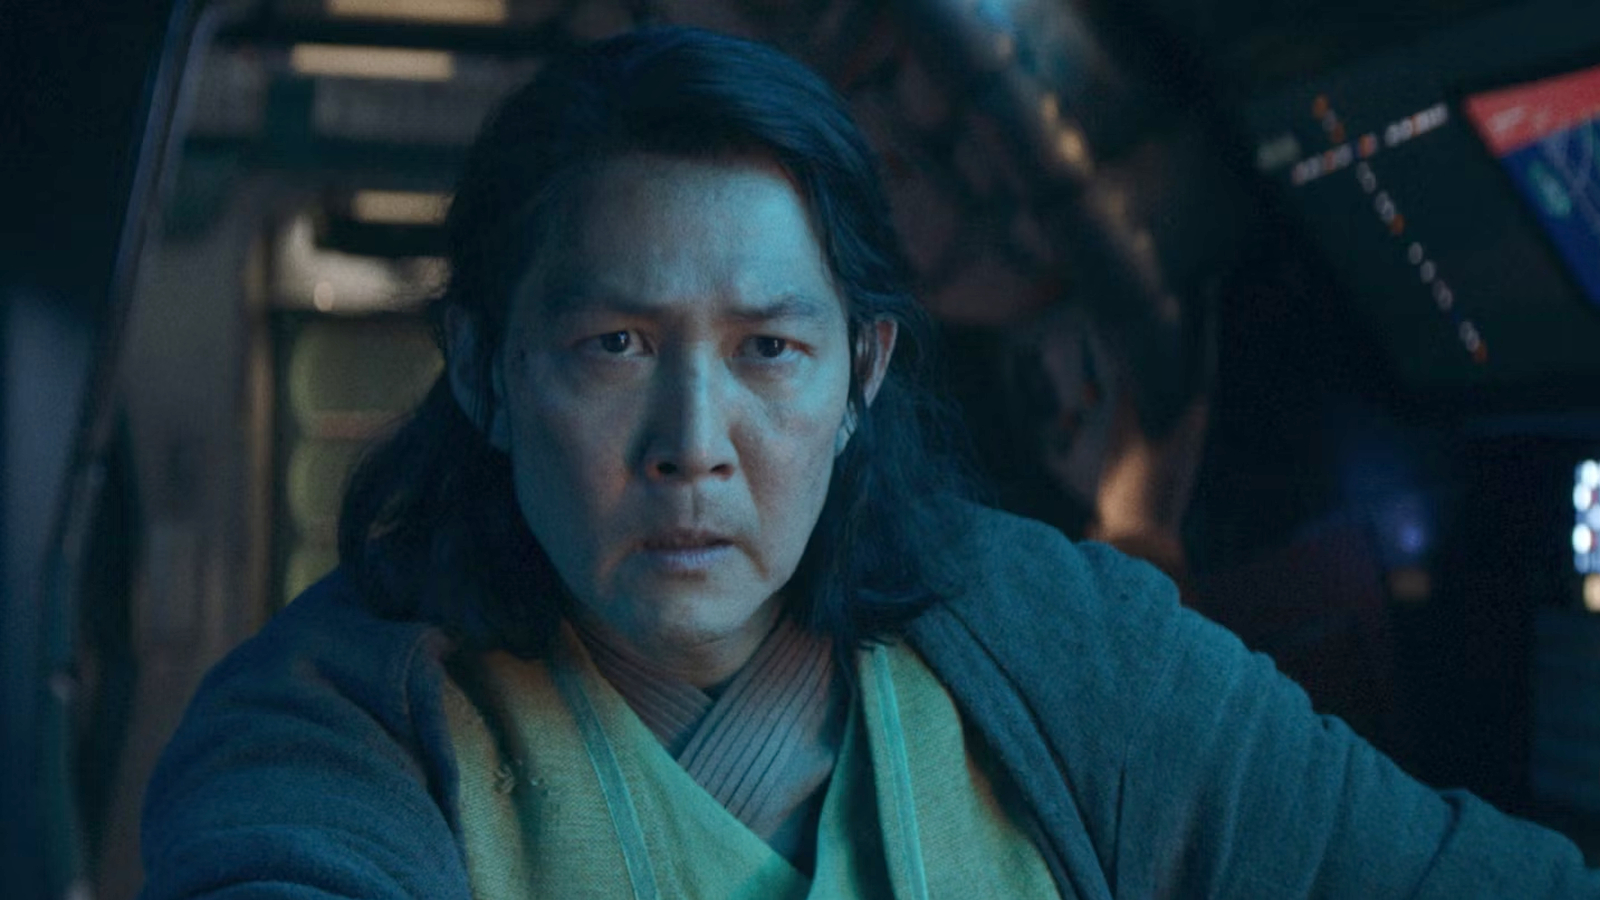 Lee Jung-jae as Master Sol in The Acolyte